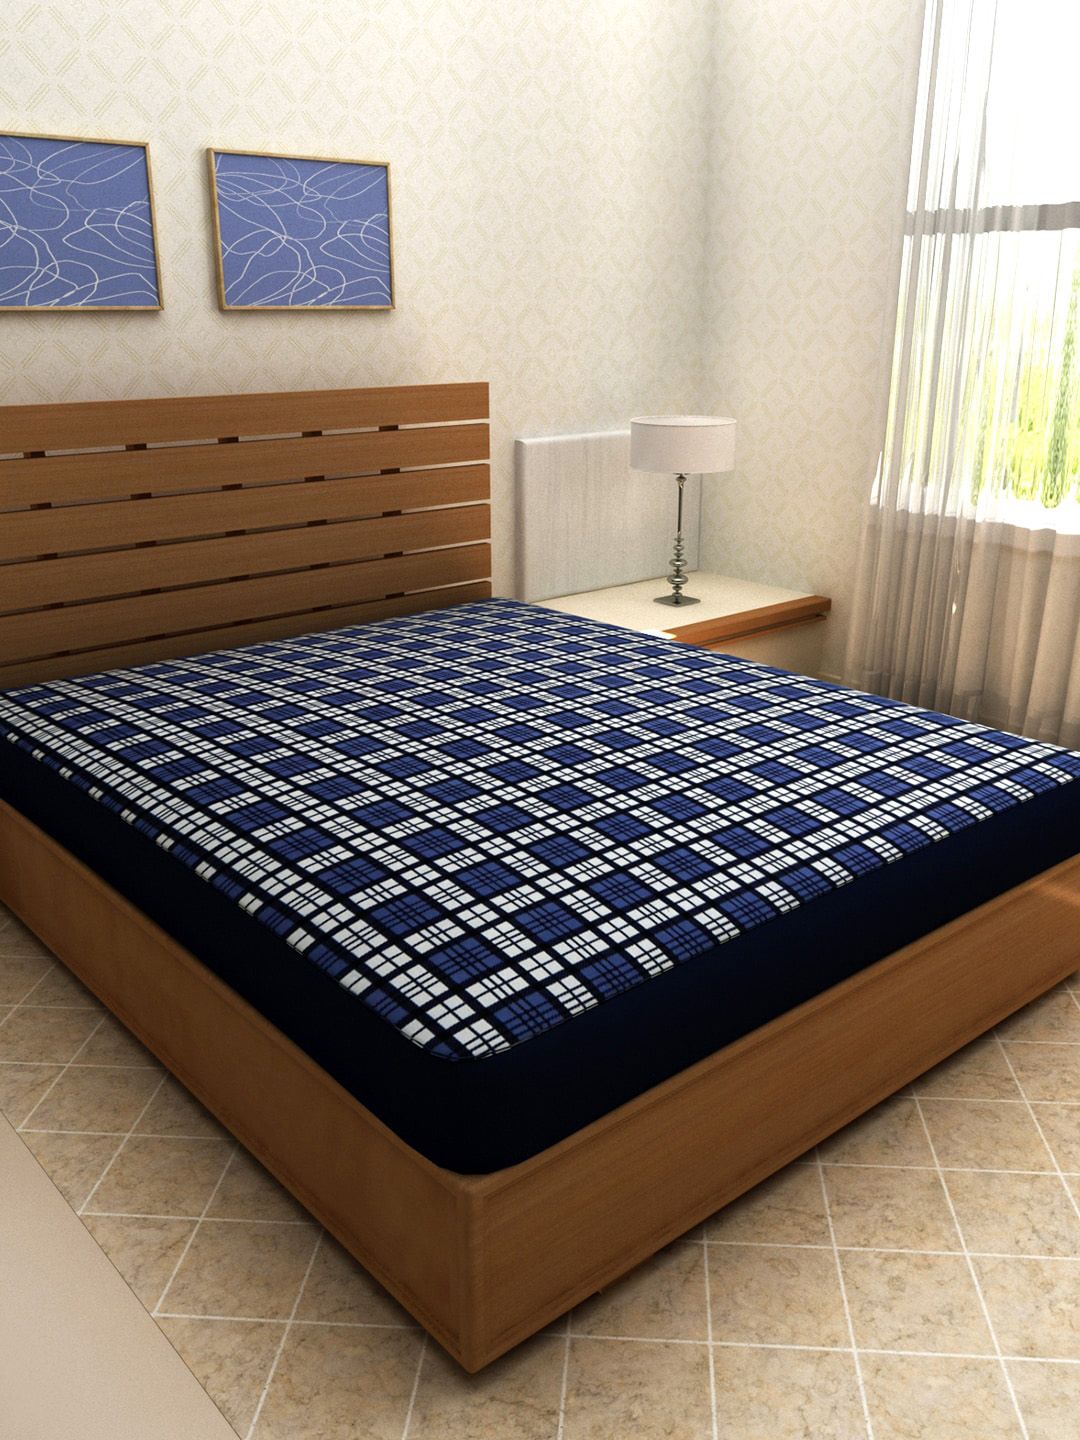 ROMEE Unisex Blue & White Printed Mattress Protector Price in India